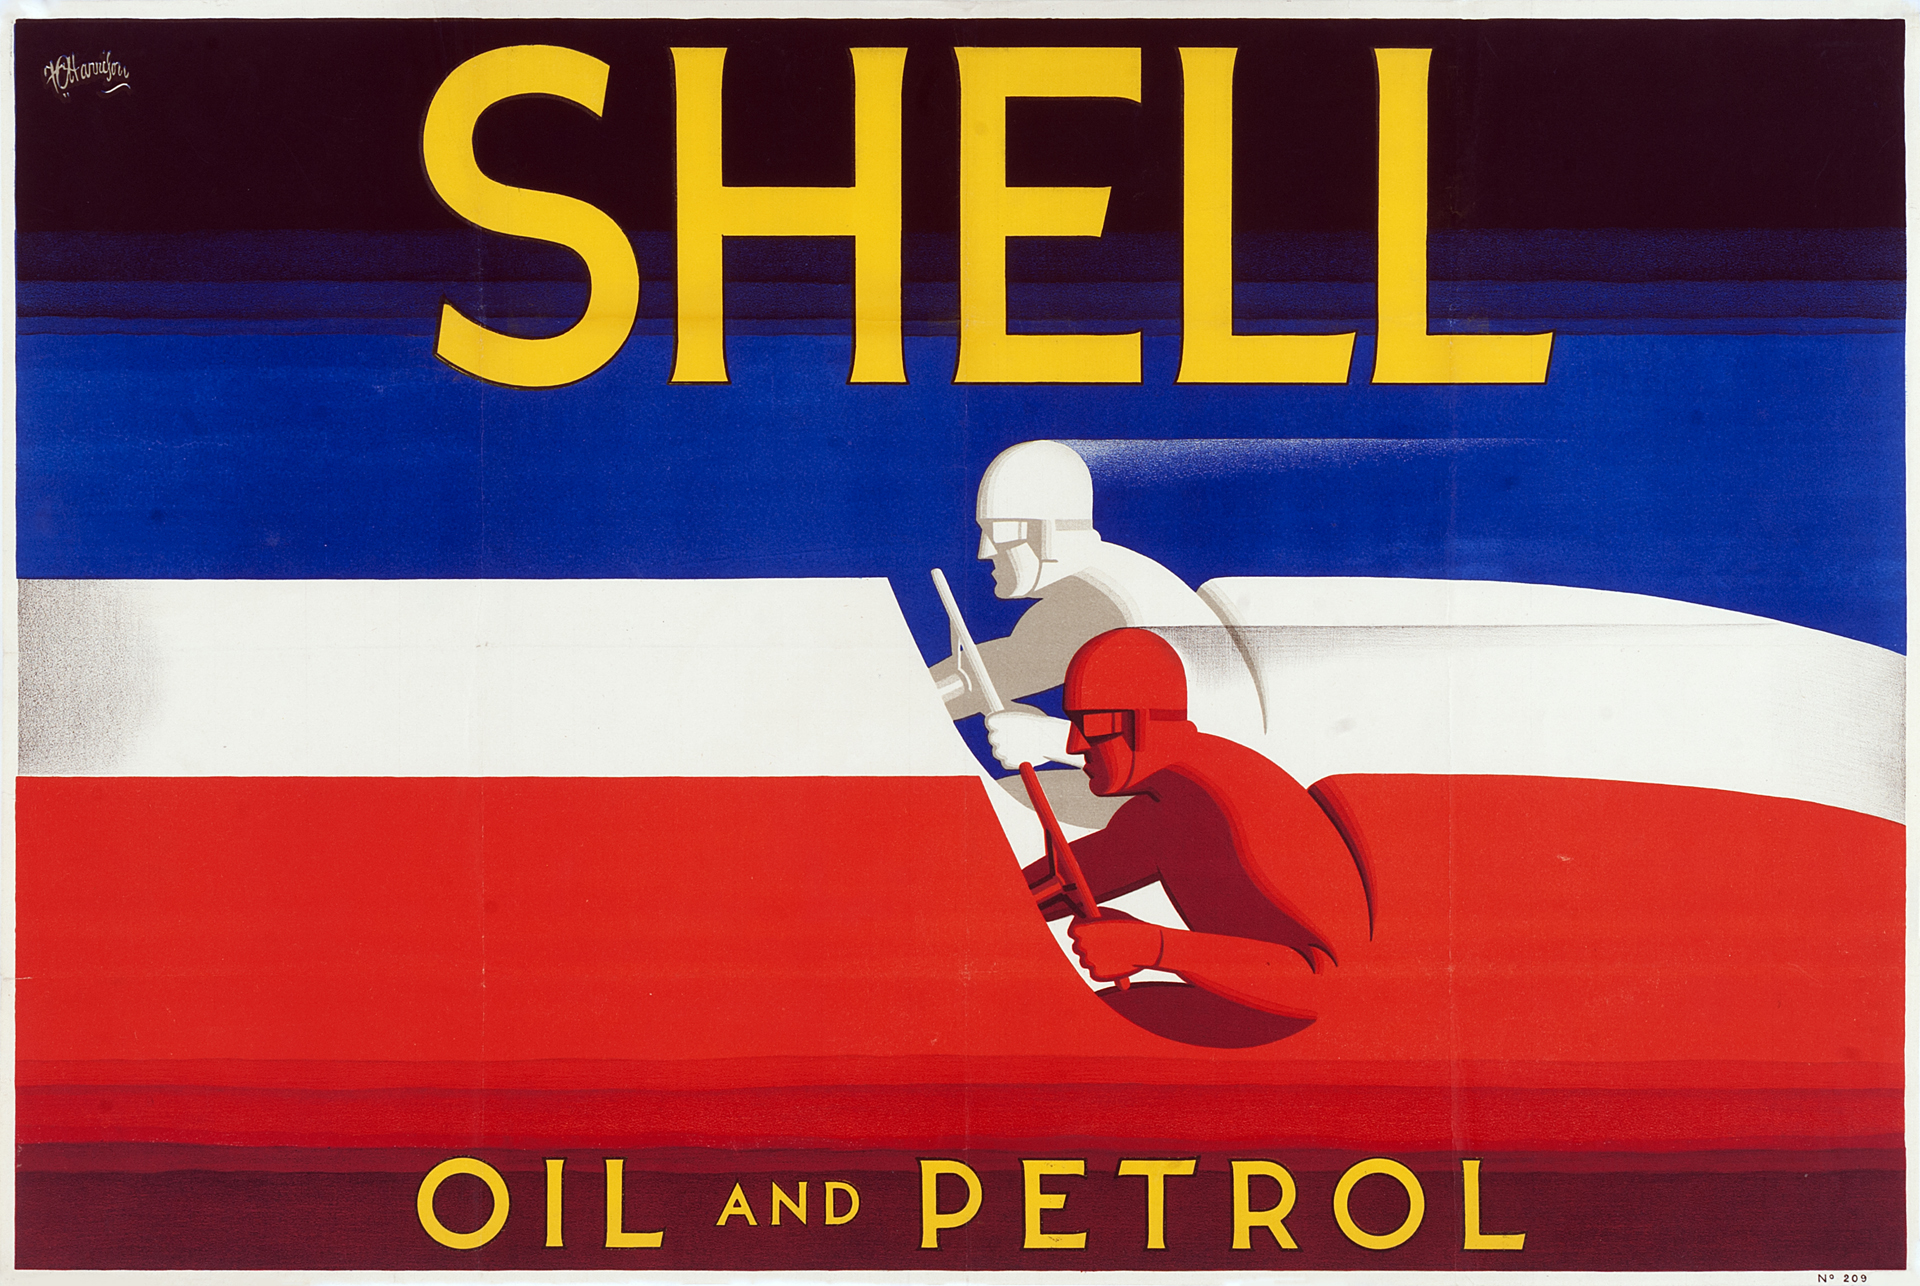 Poster of Shell Oil and Petrol, 1928